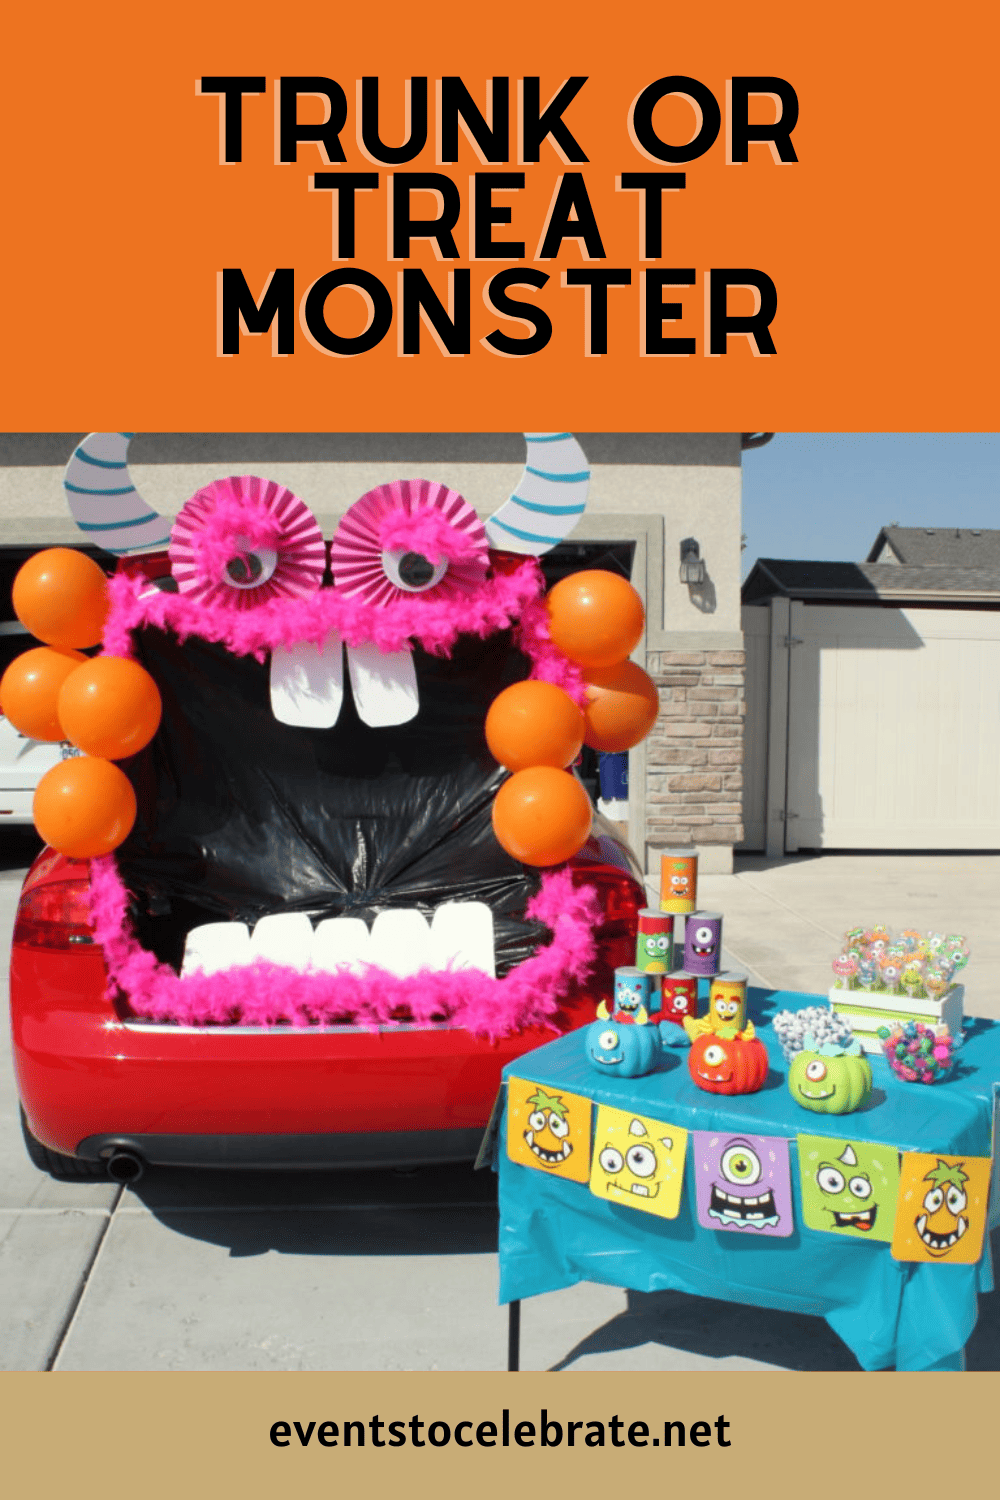 Easy Trunk Or Treat Monster Tutorial - Party Ideas for Real People